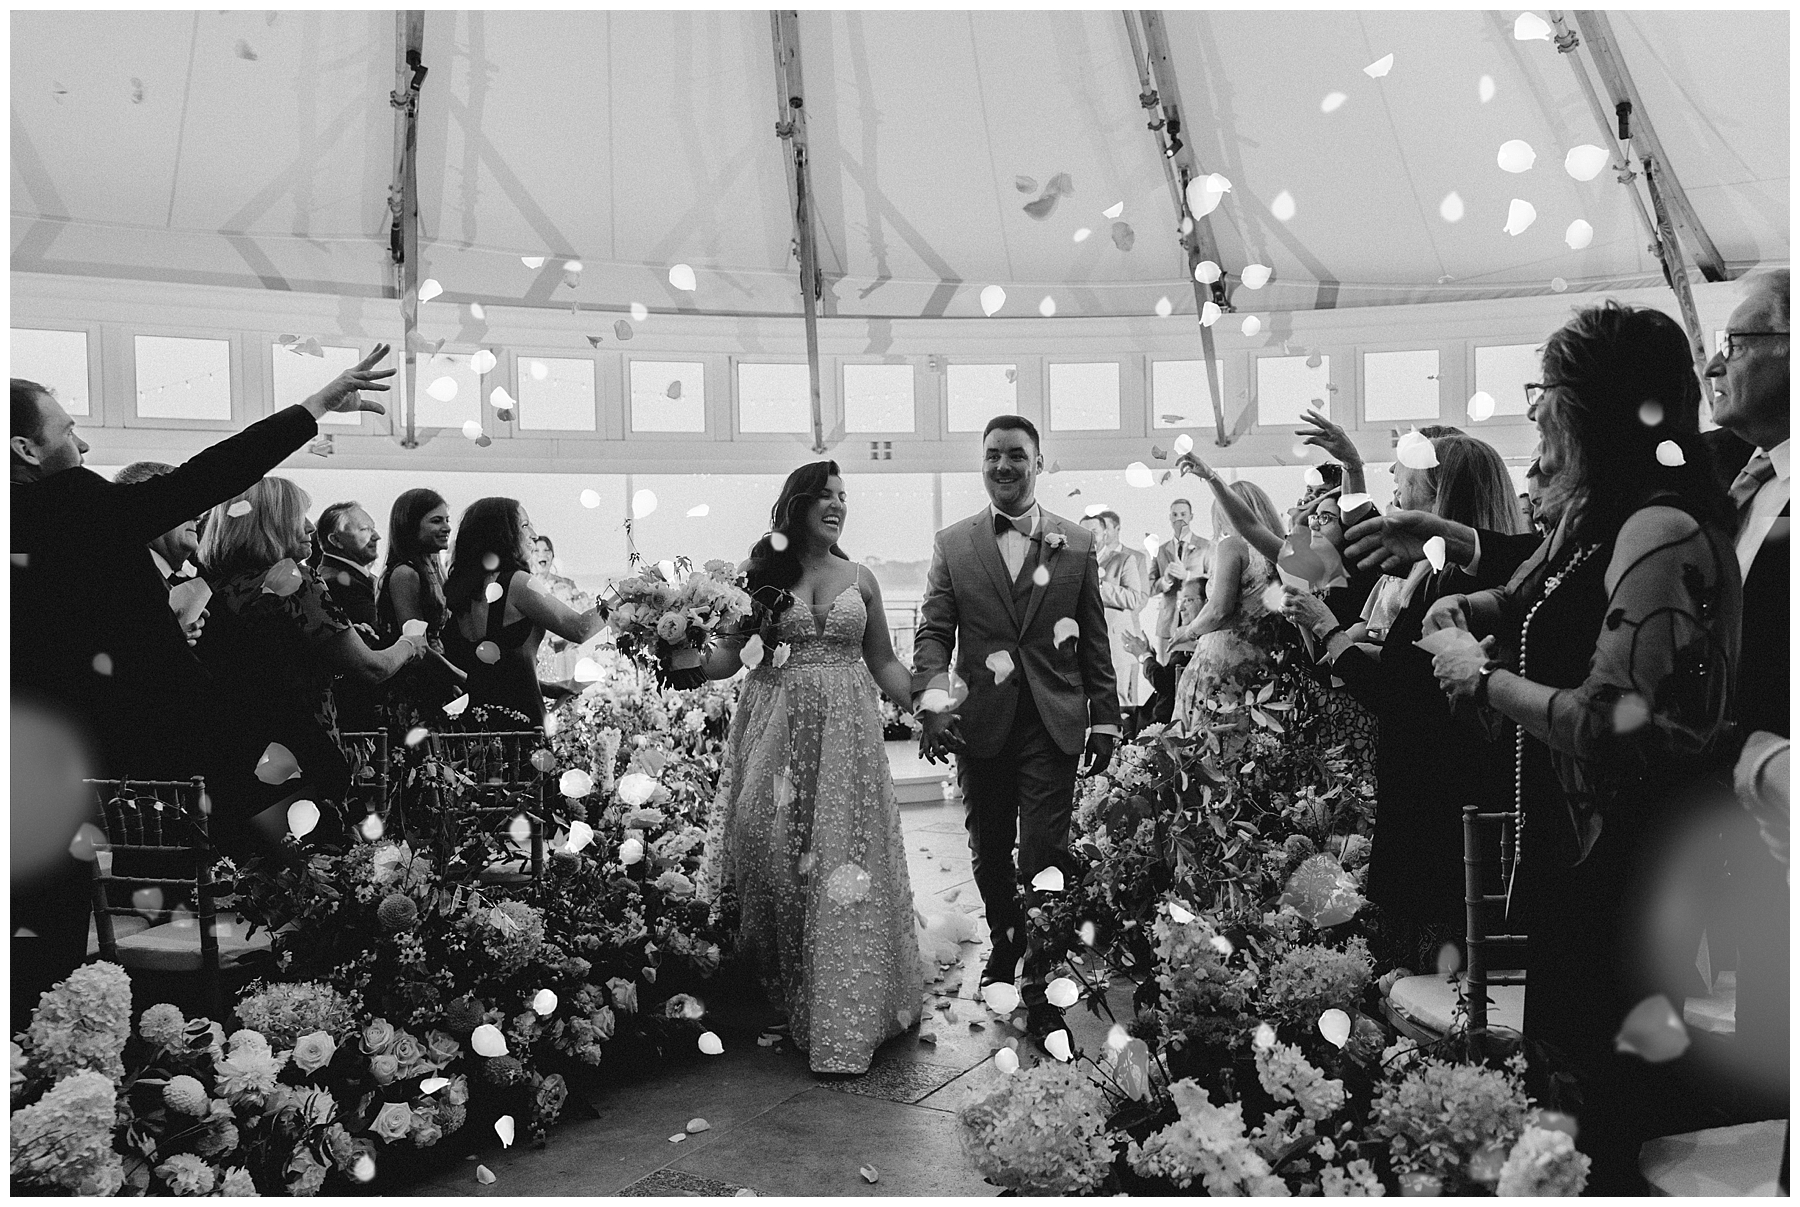 guests throw flower petals at newlyweds as they exit wedding ceremony